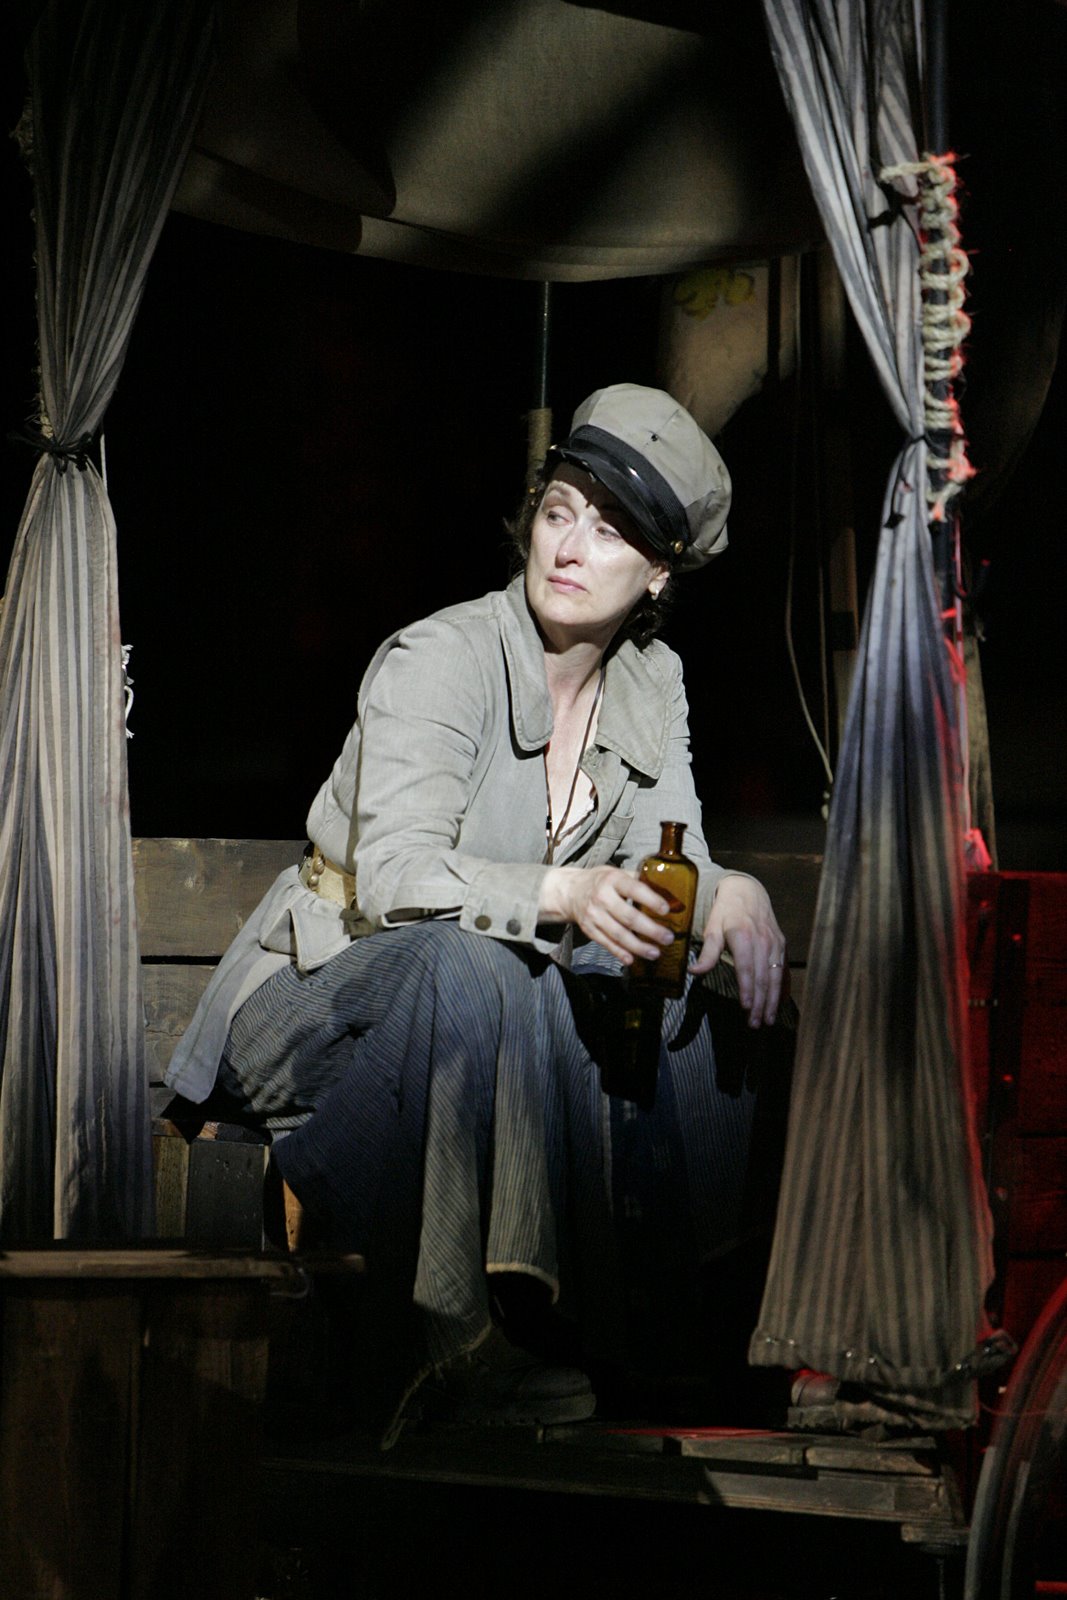 Meryl Streep as the title character in The Public Theater 2006 production of "Mother Courage and Her Children", as featured in John Walter's documentary THEATER OF WAR.  Photo credit: The Public Theater / Michael Daniel.